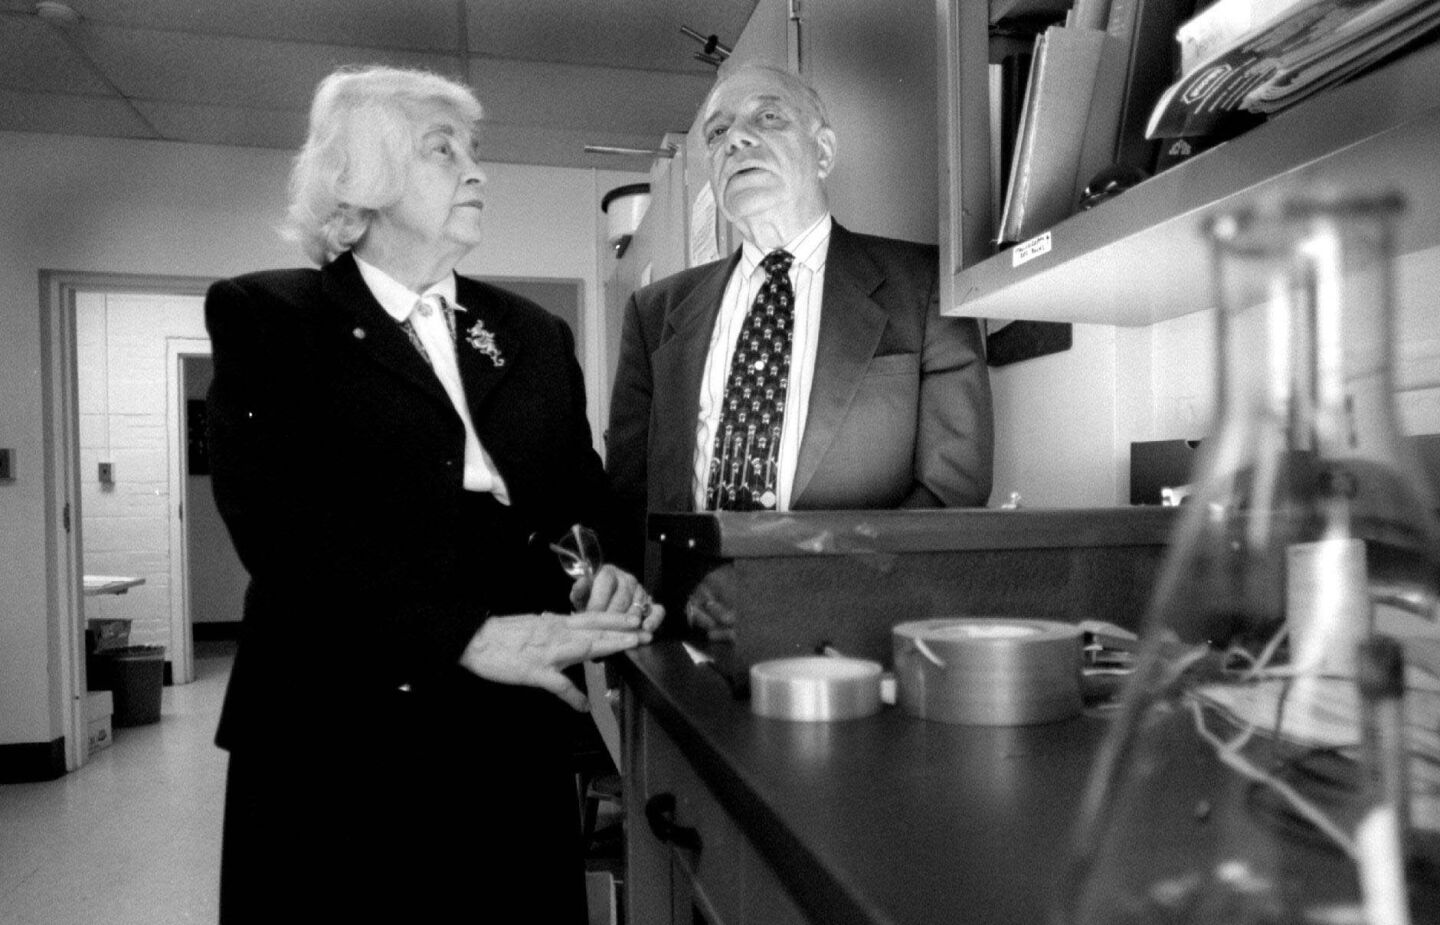 Winner of the 1985 Nobel Prize in chemistry, the Brooklyn-born scientist's molecule-mapping work decades ago is still important to the pharmaceutical industry. Karle, seen here with his wife and lab partner Isabelle, was 94. Full obituary Notable deaths of 2012